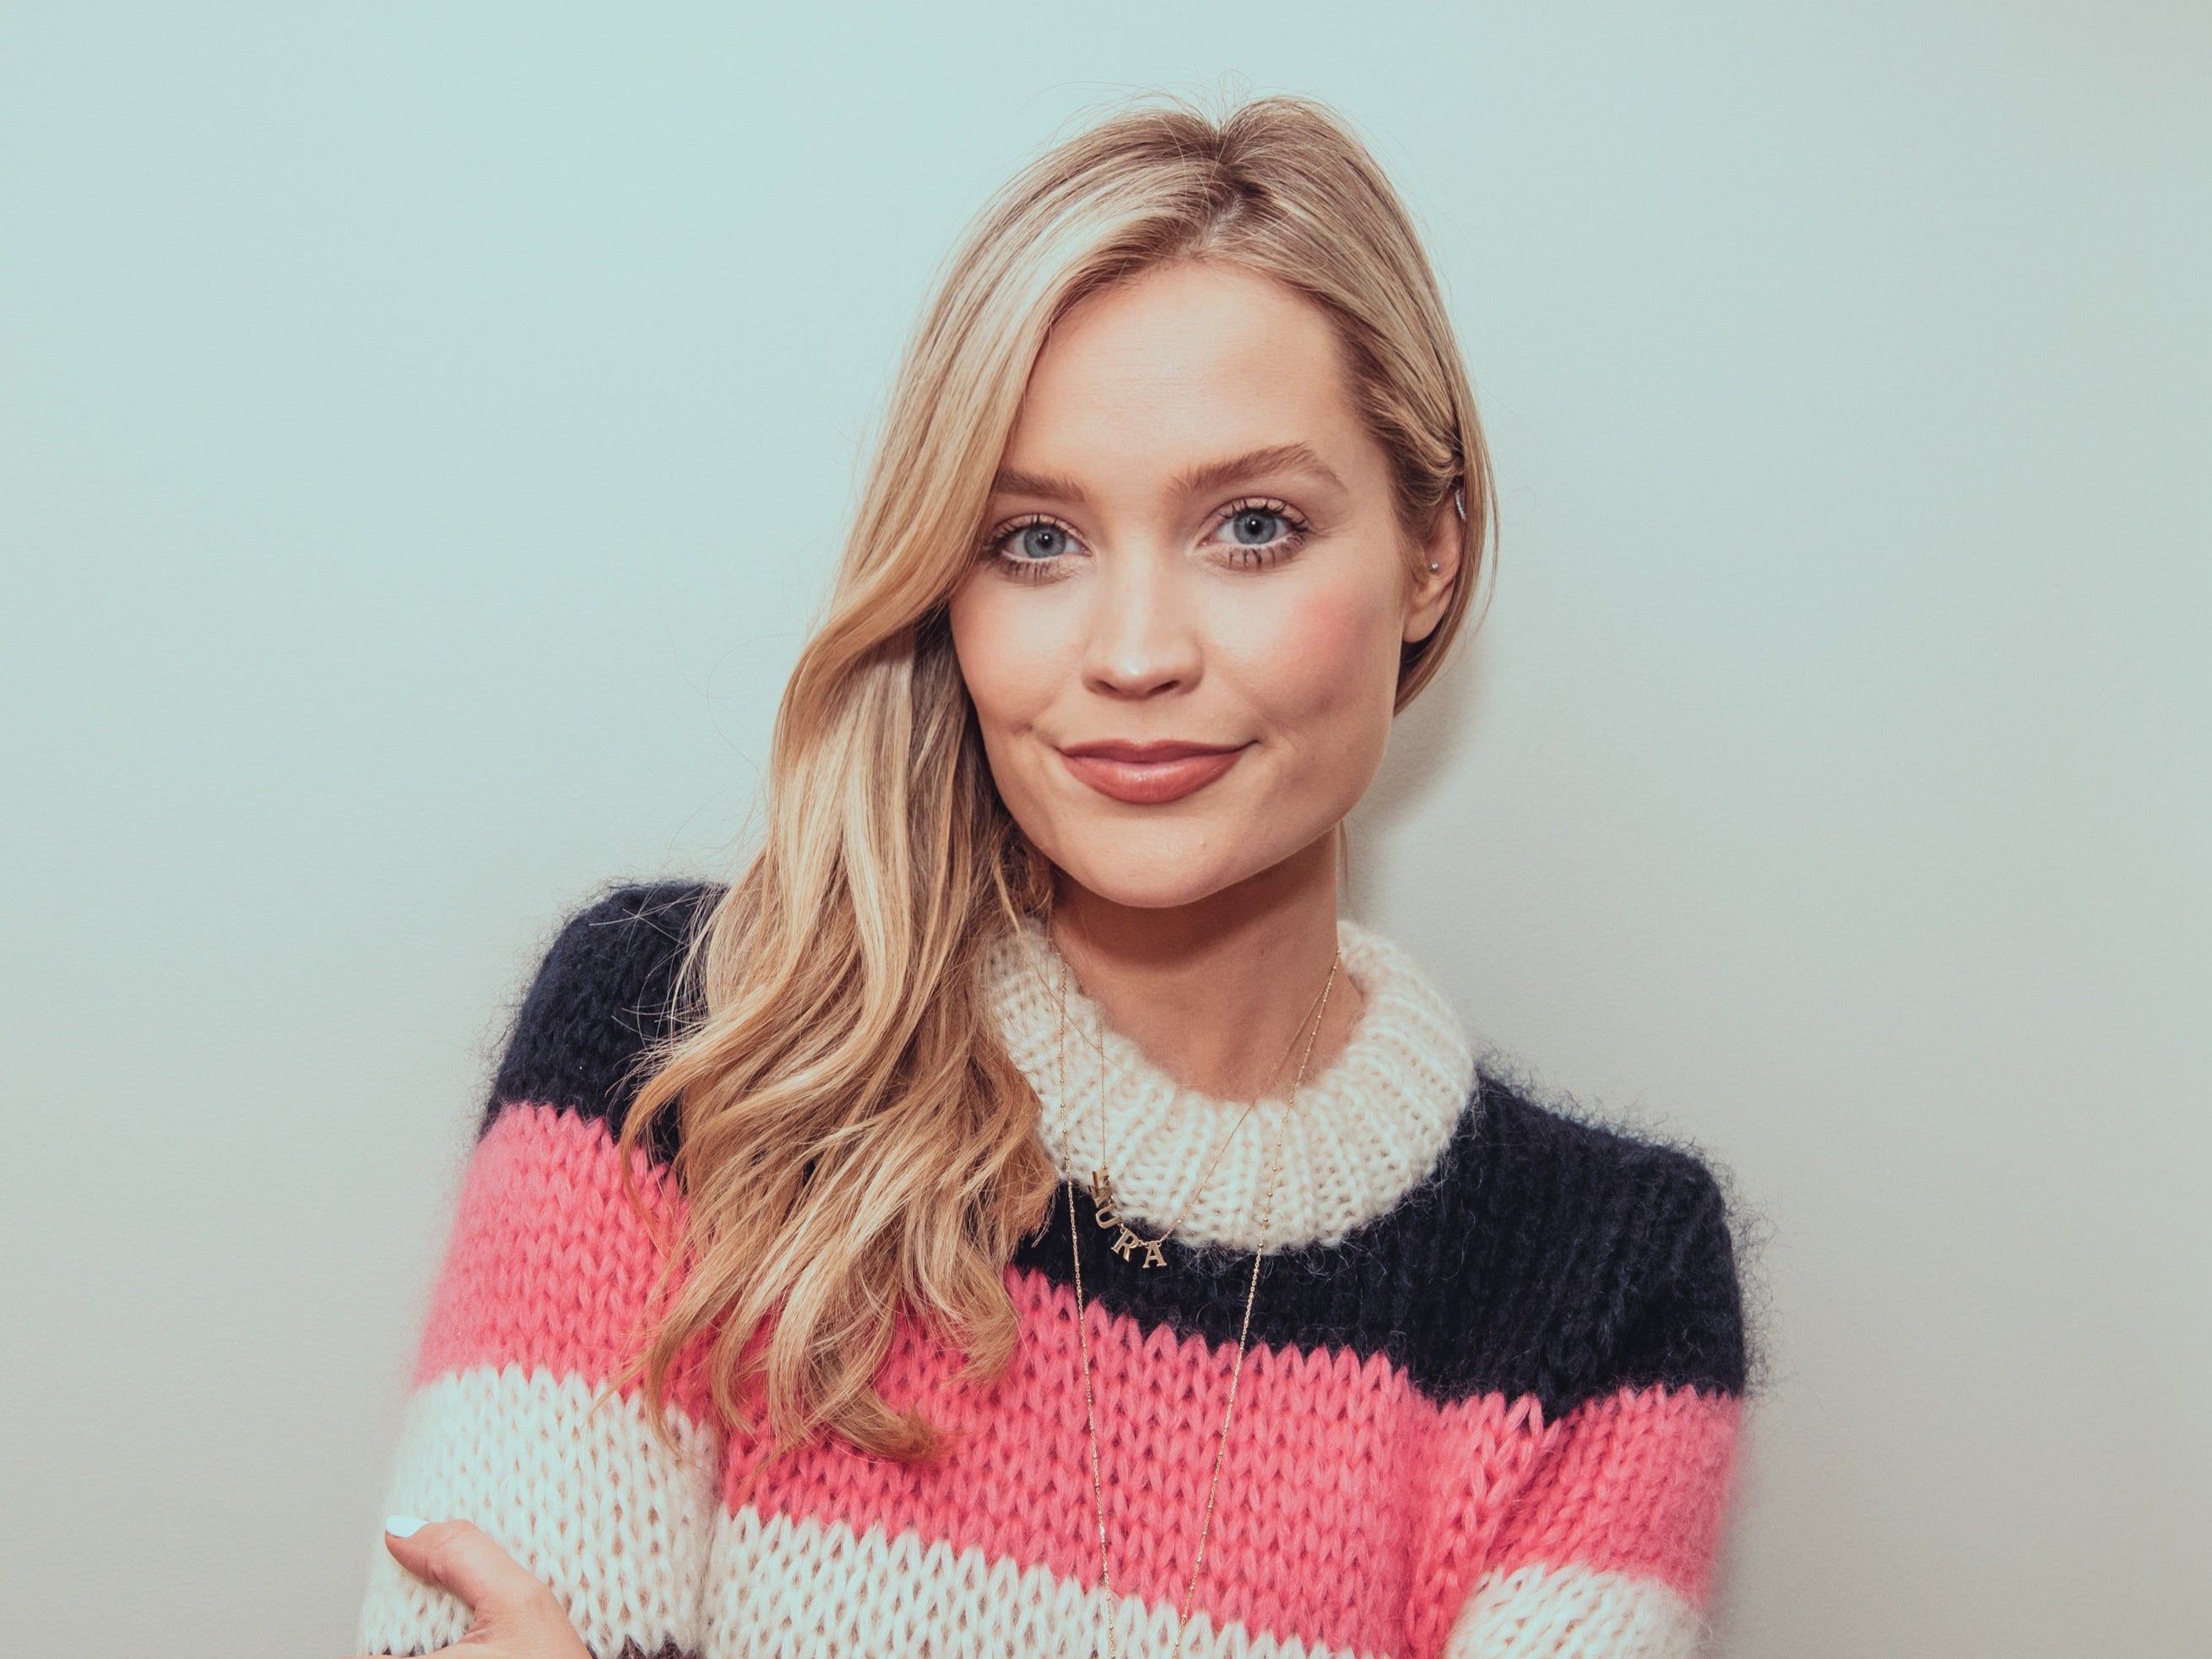 Laura Whitmore: ‘I just want to get better at what I do. If I did the same thing every day, I’m never gonna get better’